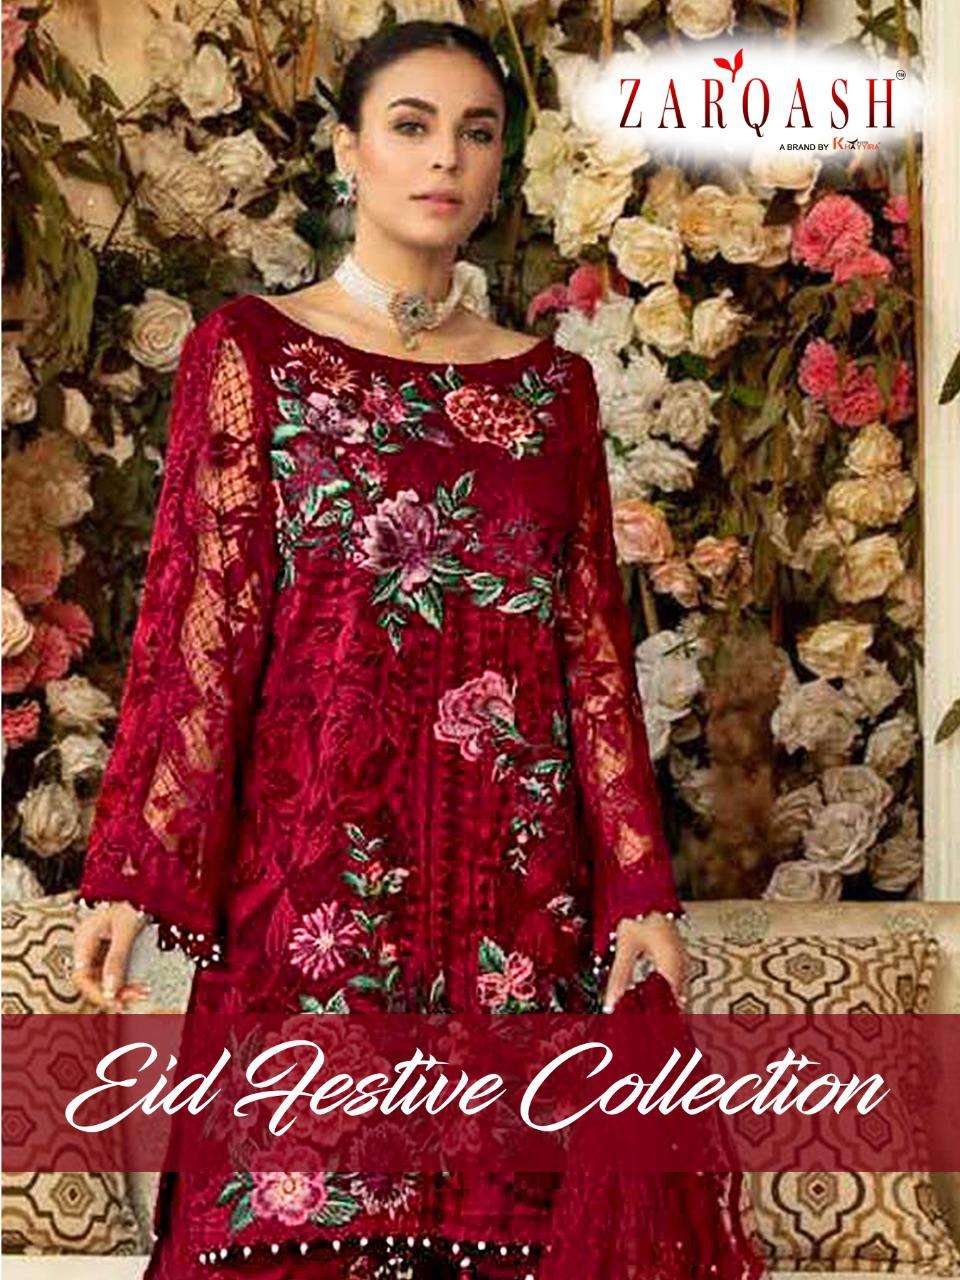 Zarqash Eid festive Collection Butterfly Net with embroidery...